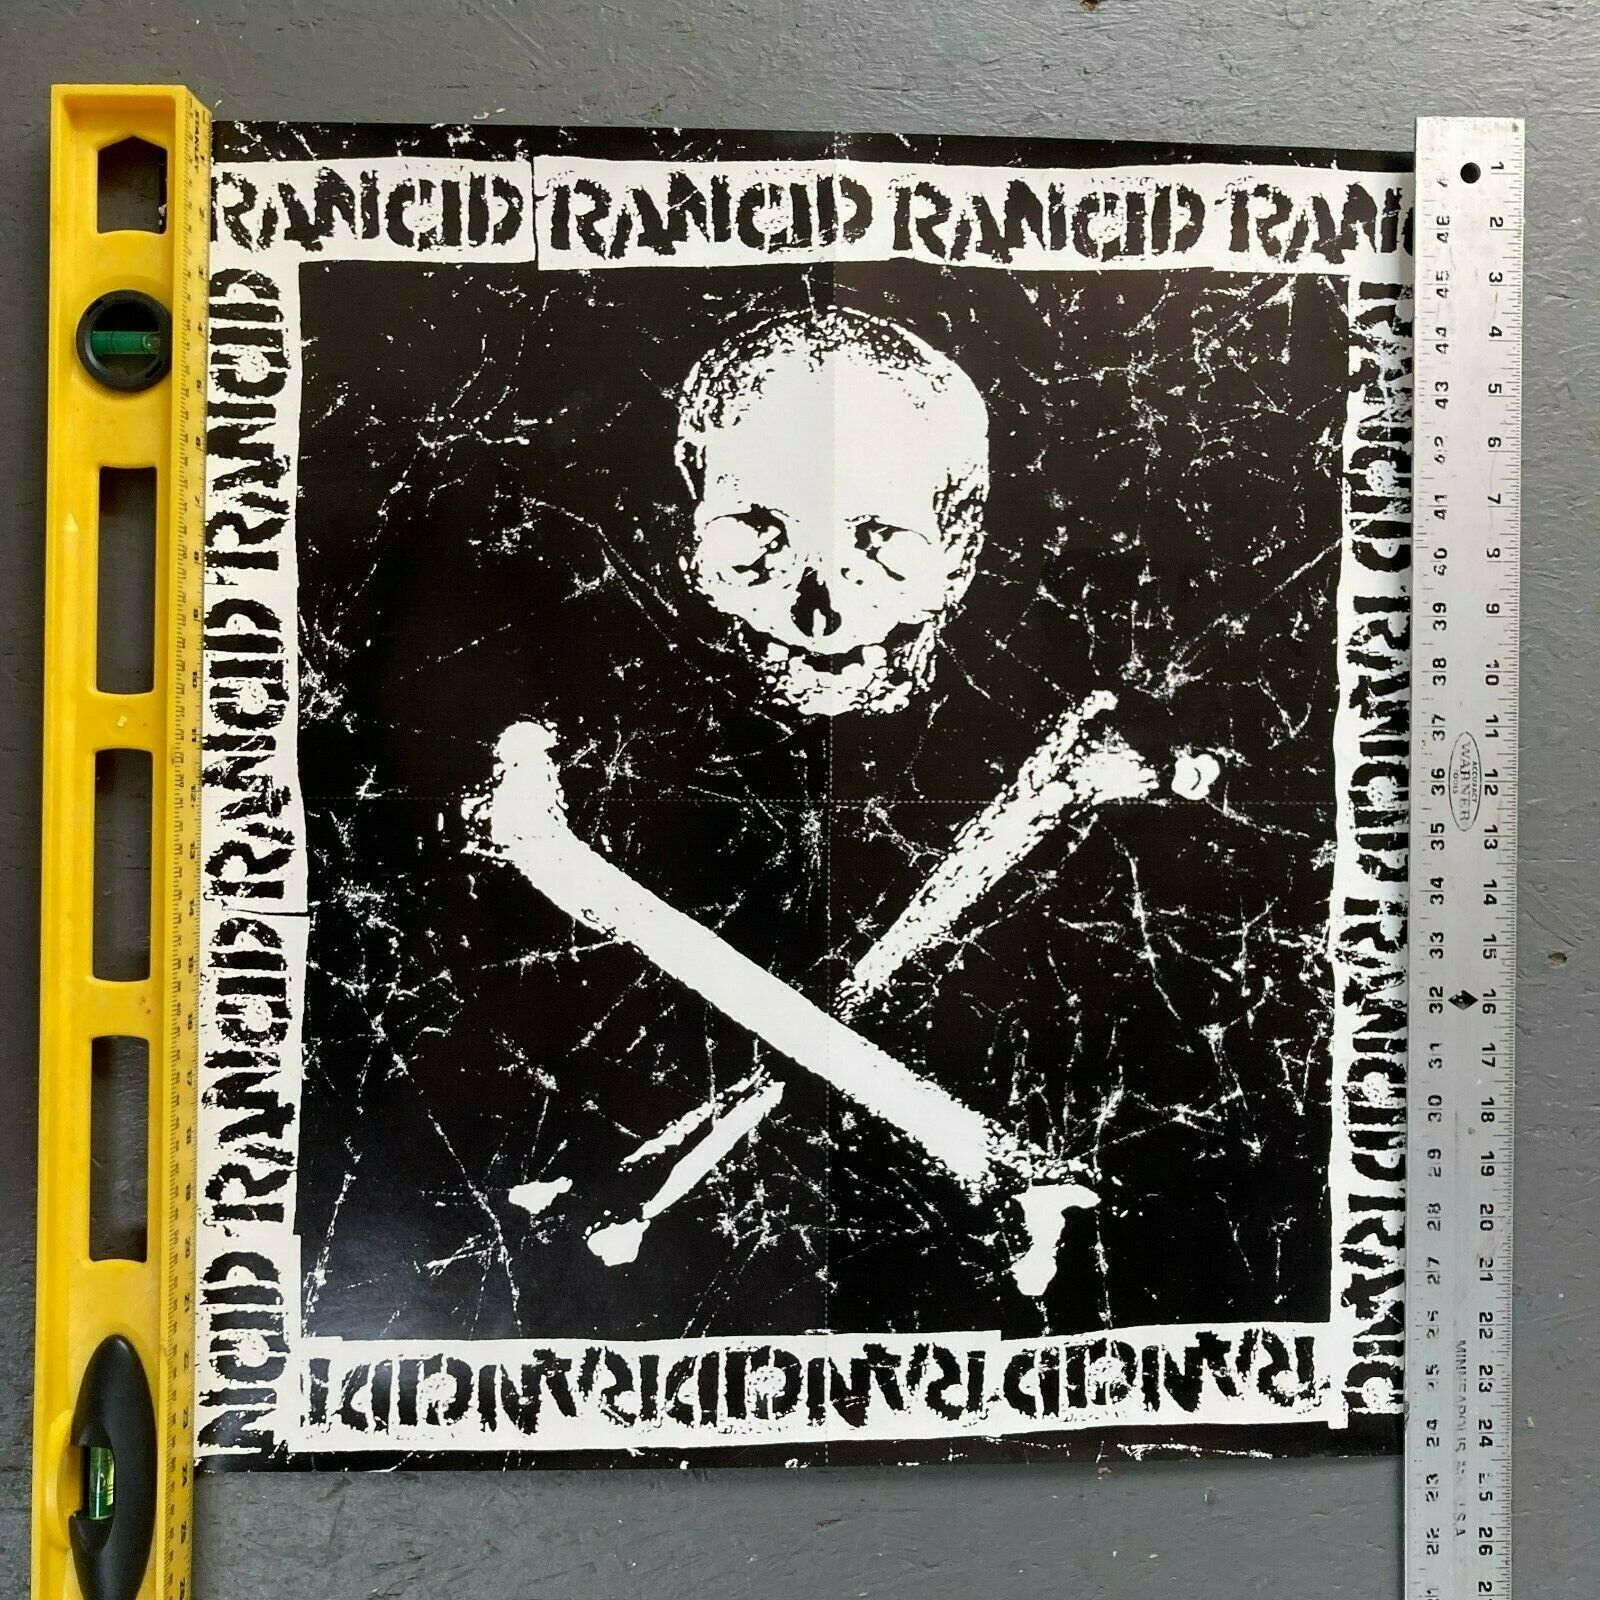 Rancid Rare Vintage Hellcat Records Lp Promo Poster  - Record Store Only - Doubl